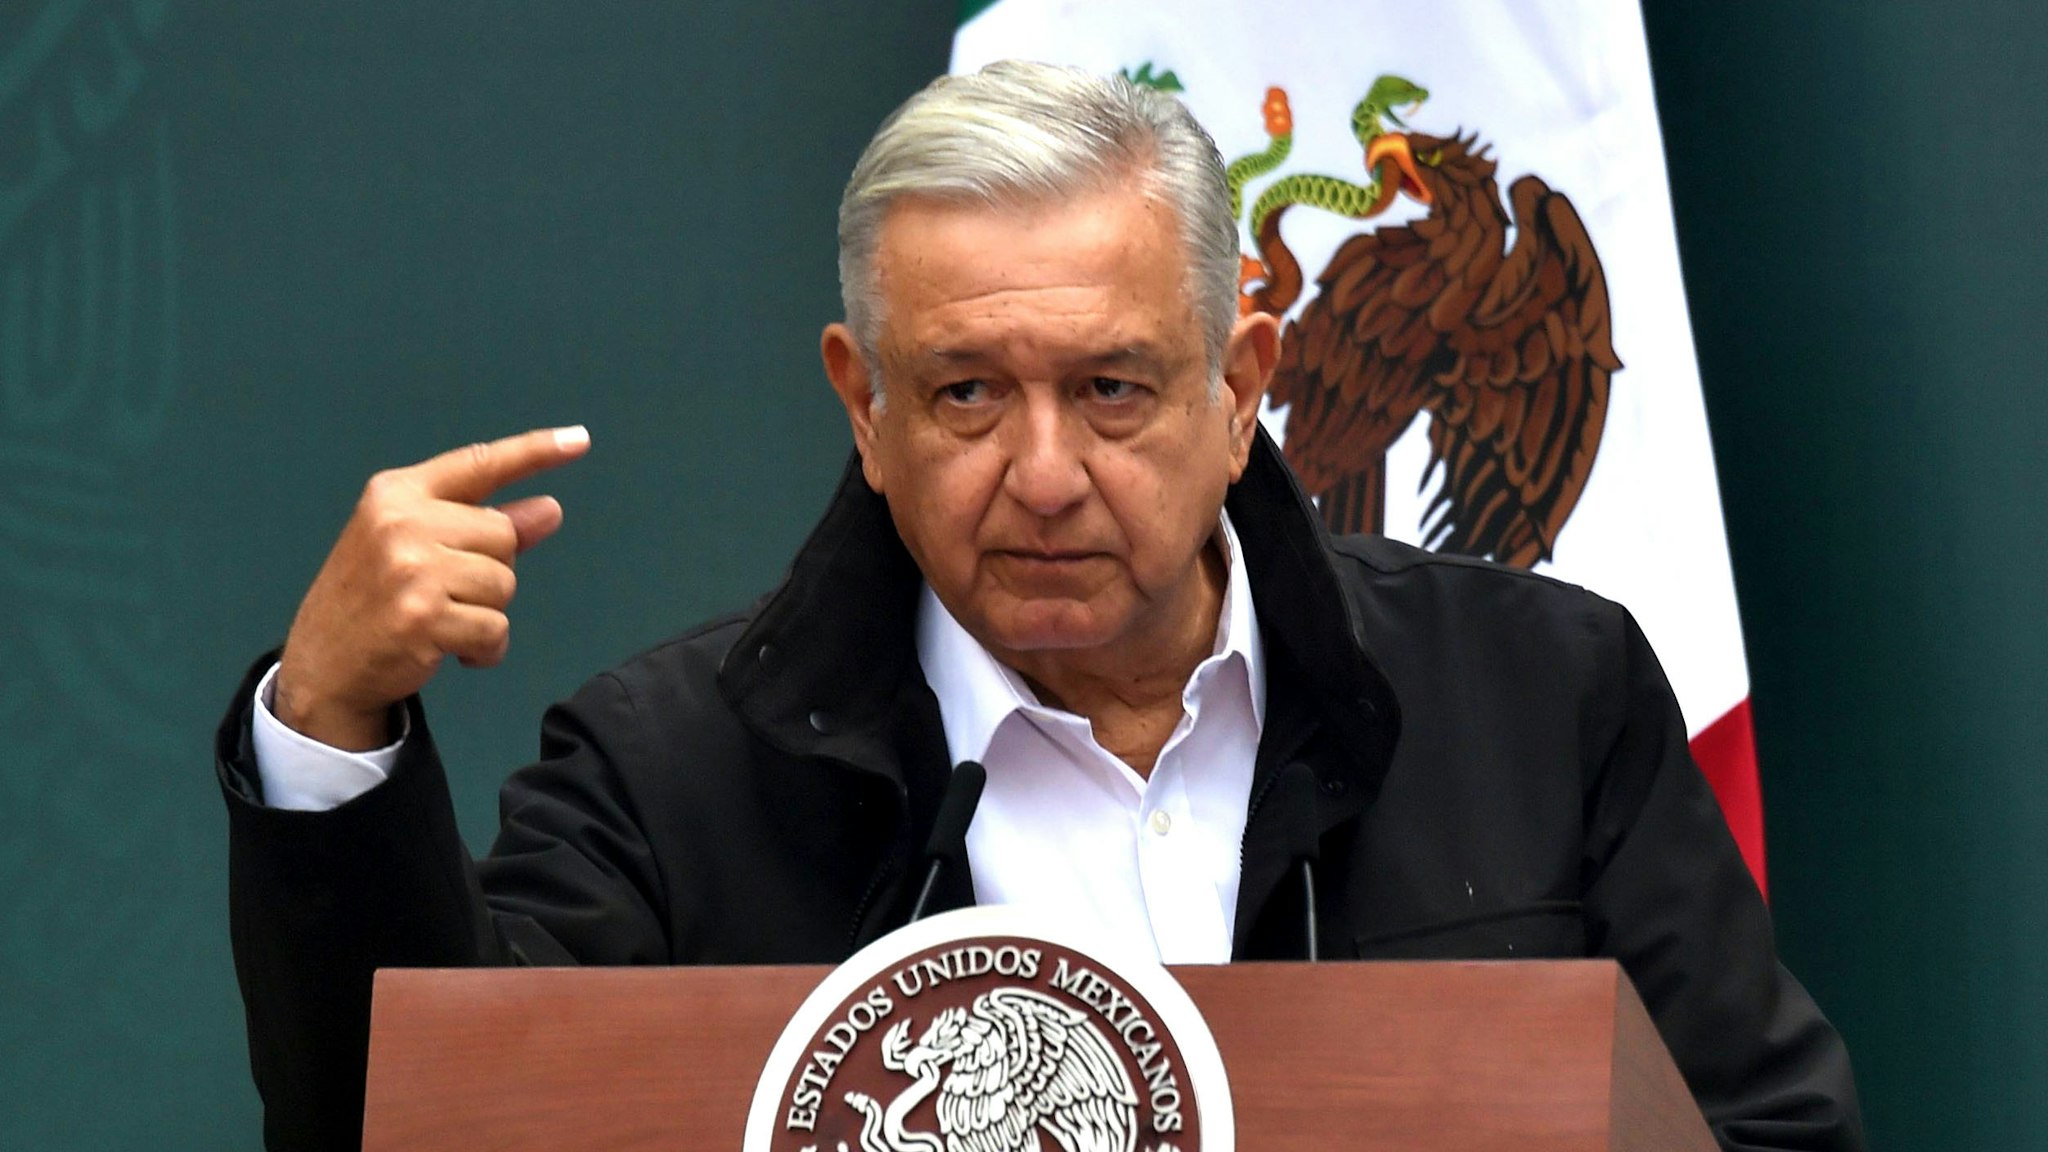 Mexico's President Andres Manuel Lopez Obrador, speaks during a meeting with relatives of the 43 students of the teaching training school in Ayotzinapa who went missing on September 26, 2014, at the National Palace in Mexico City on September 26, 2020 on the sixth anniversary of their disappearance. - The students had commandeered five buses to travel to a protest on the night of September 26, 2014, but were stopped by municipal police in the city of Iguala, Guerrero. Prosecutors initially said the officers delivered the 43 teacher trainees to drug cartel hitmen, who killed them, incinerated their bodies and dumped the remains in a river. However, independent experts from the Inter-American Commission on Human Rights have rejected the government's conclusion, and the unsolved case remains a stain on Mexico's reputation.